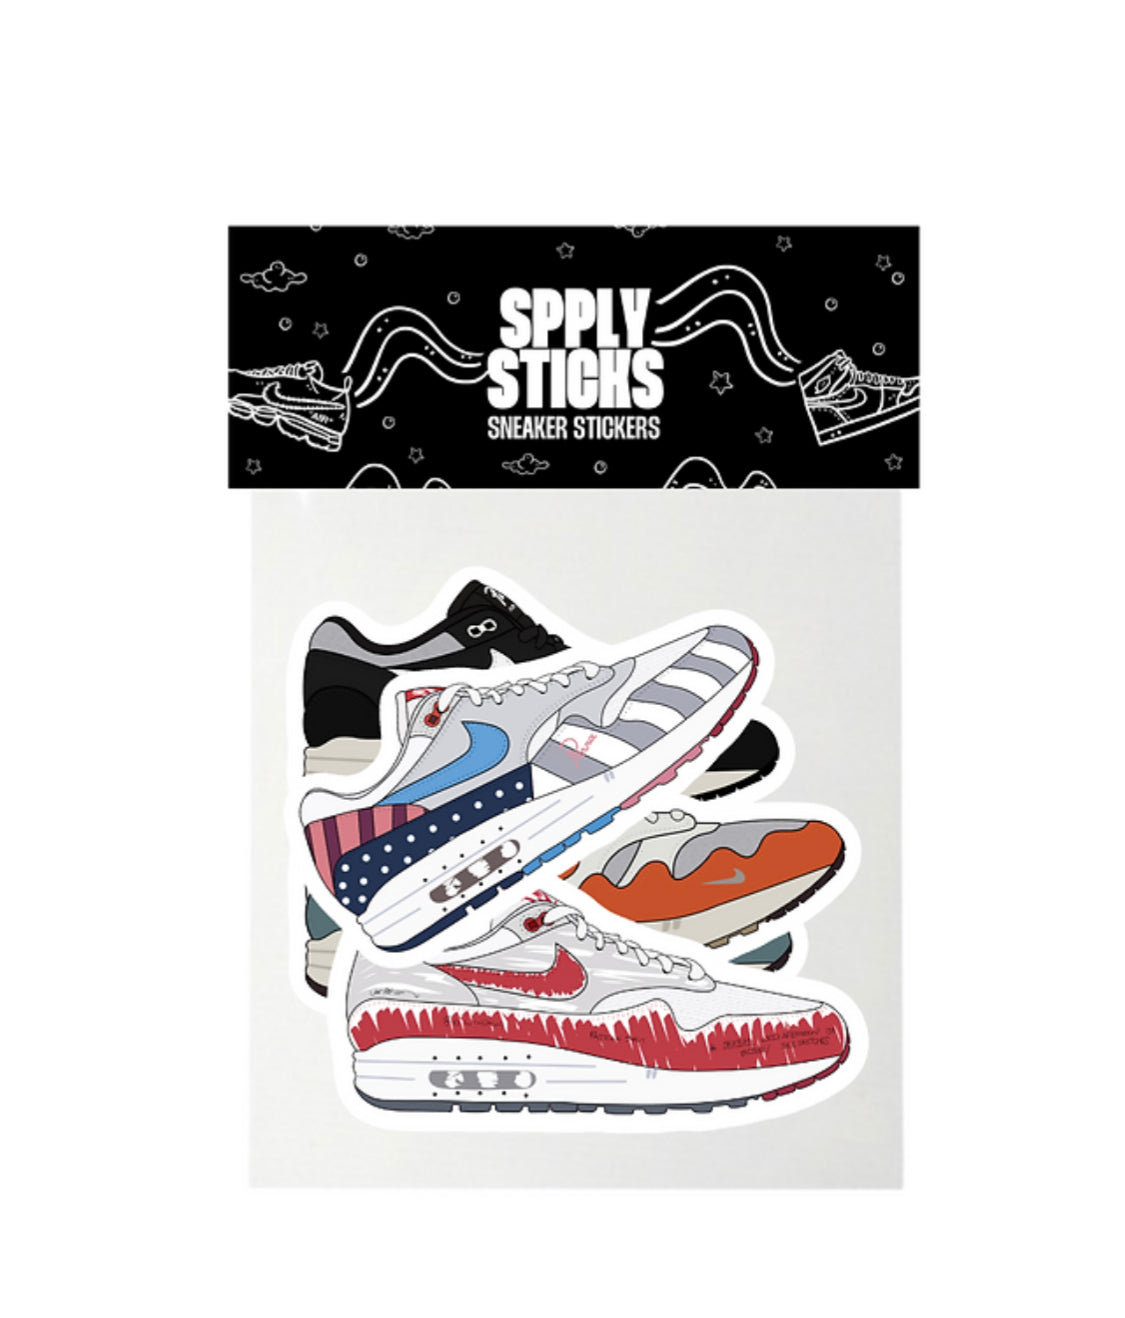 Contrast Clothing Worthing Nike sneakers sticker pack by SPPLY Sticks